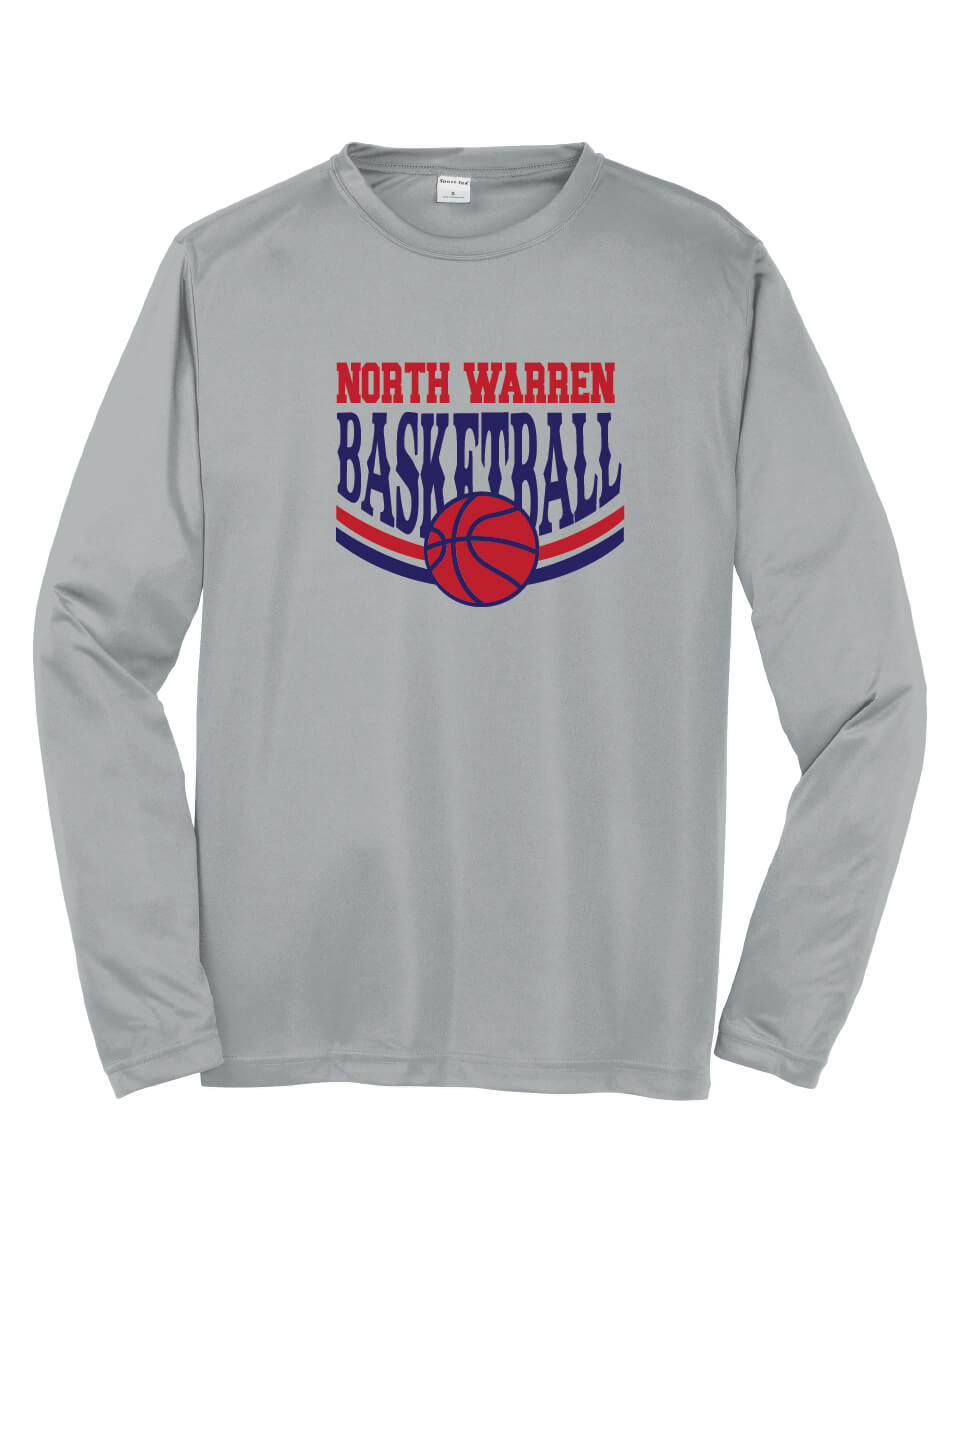 NW Basketball Sport Tek Competitor Long Sleeve Shirt (Youth) gray